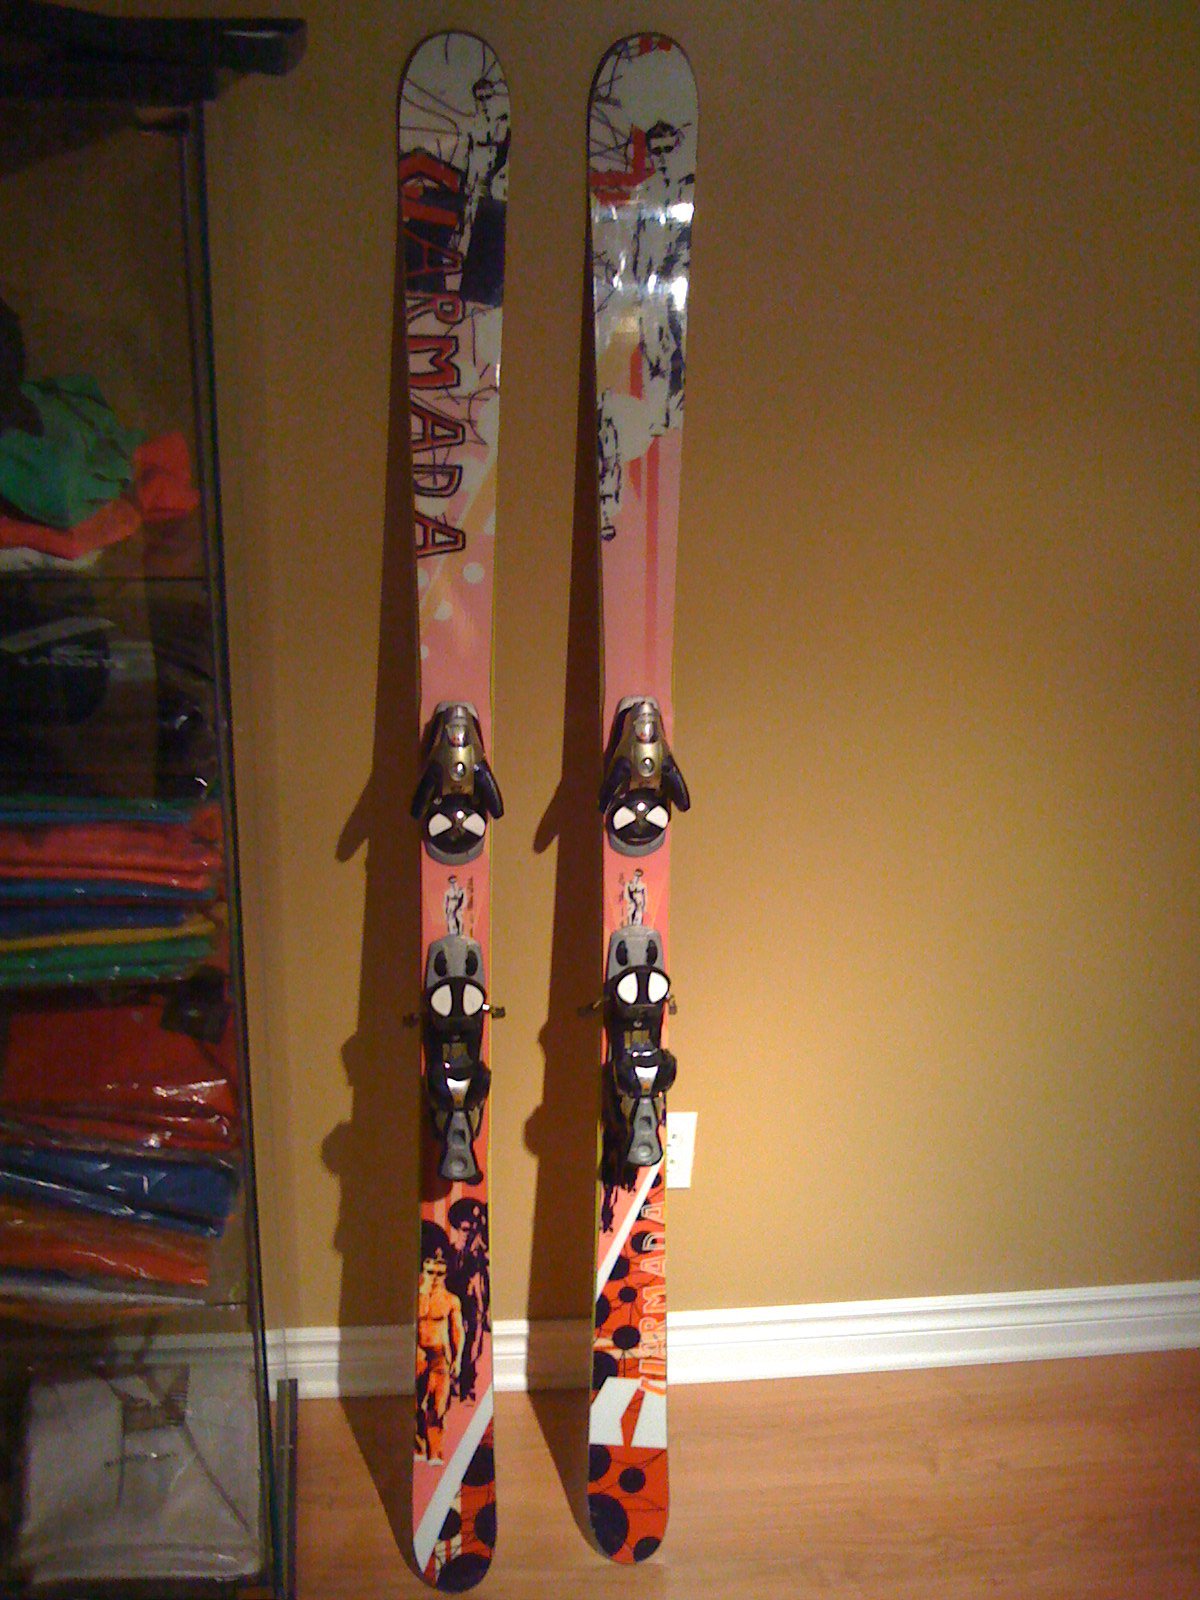 Anybody know these skis?